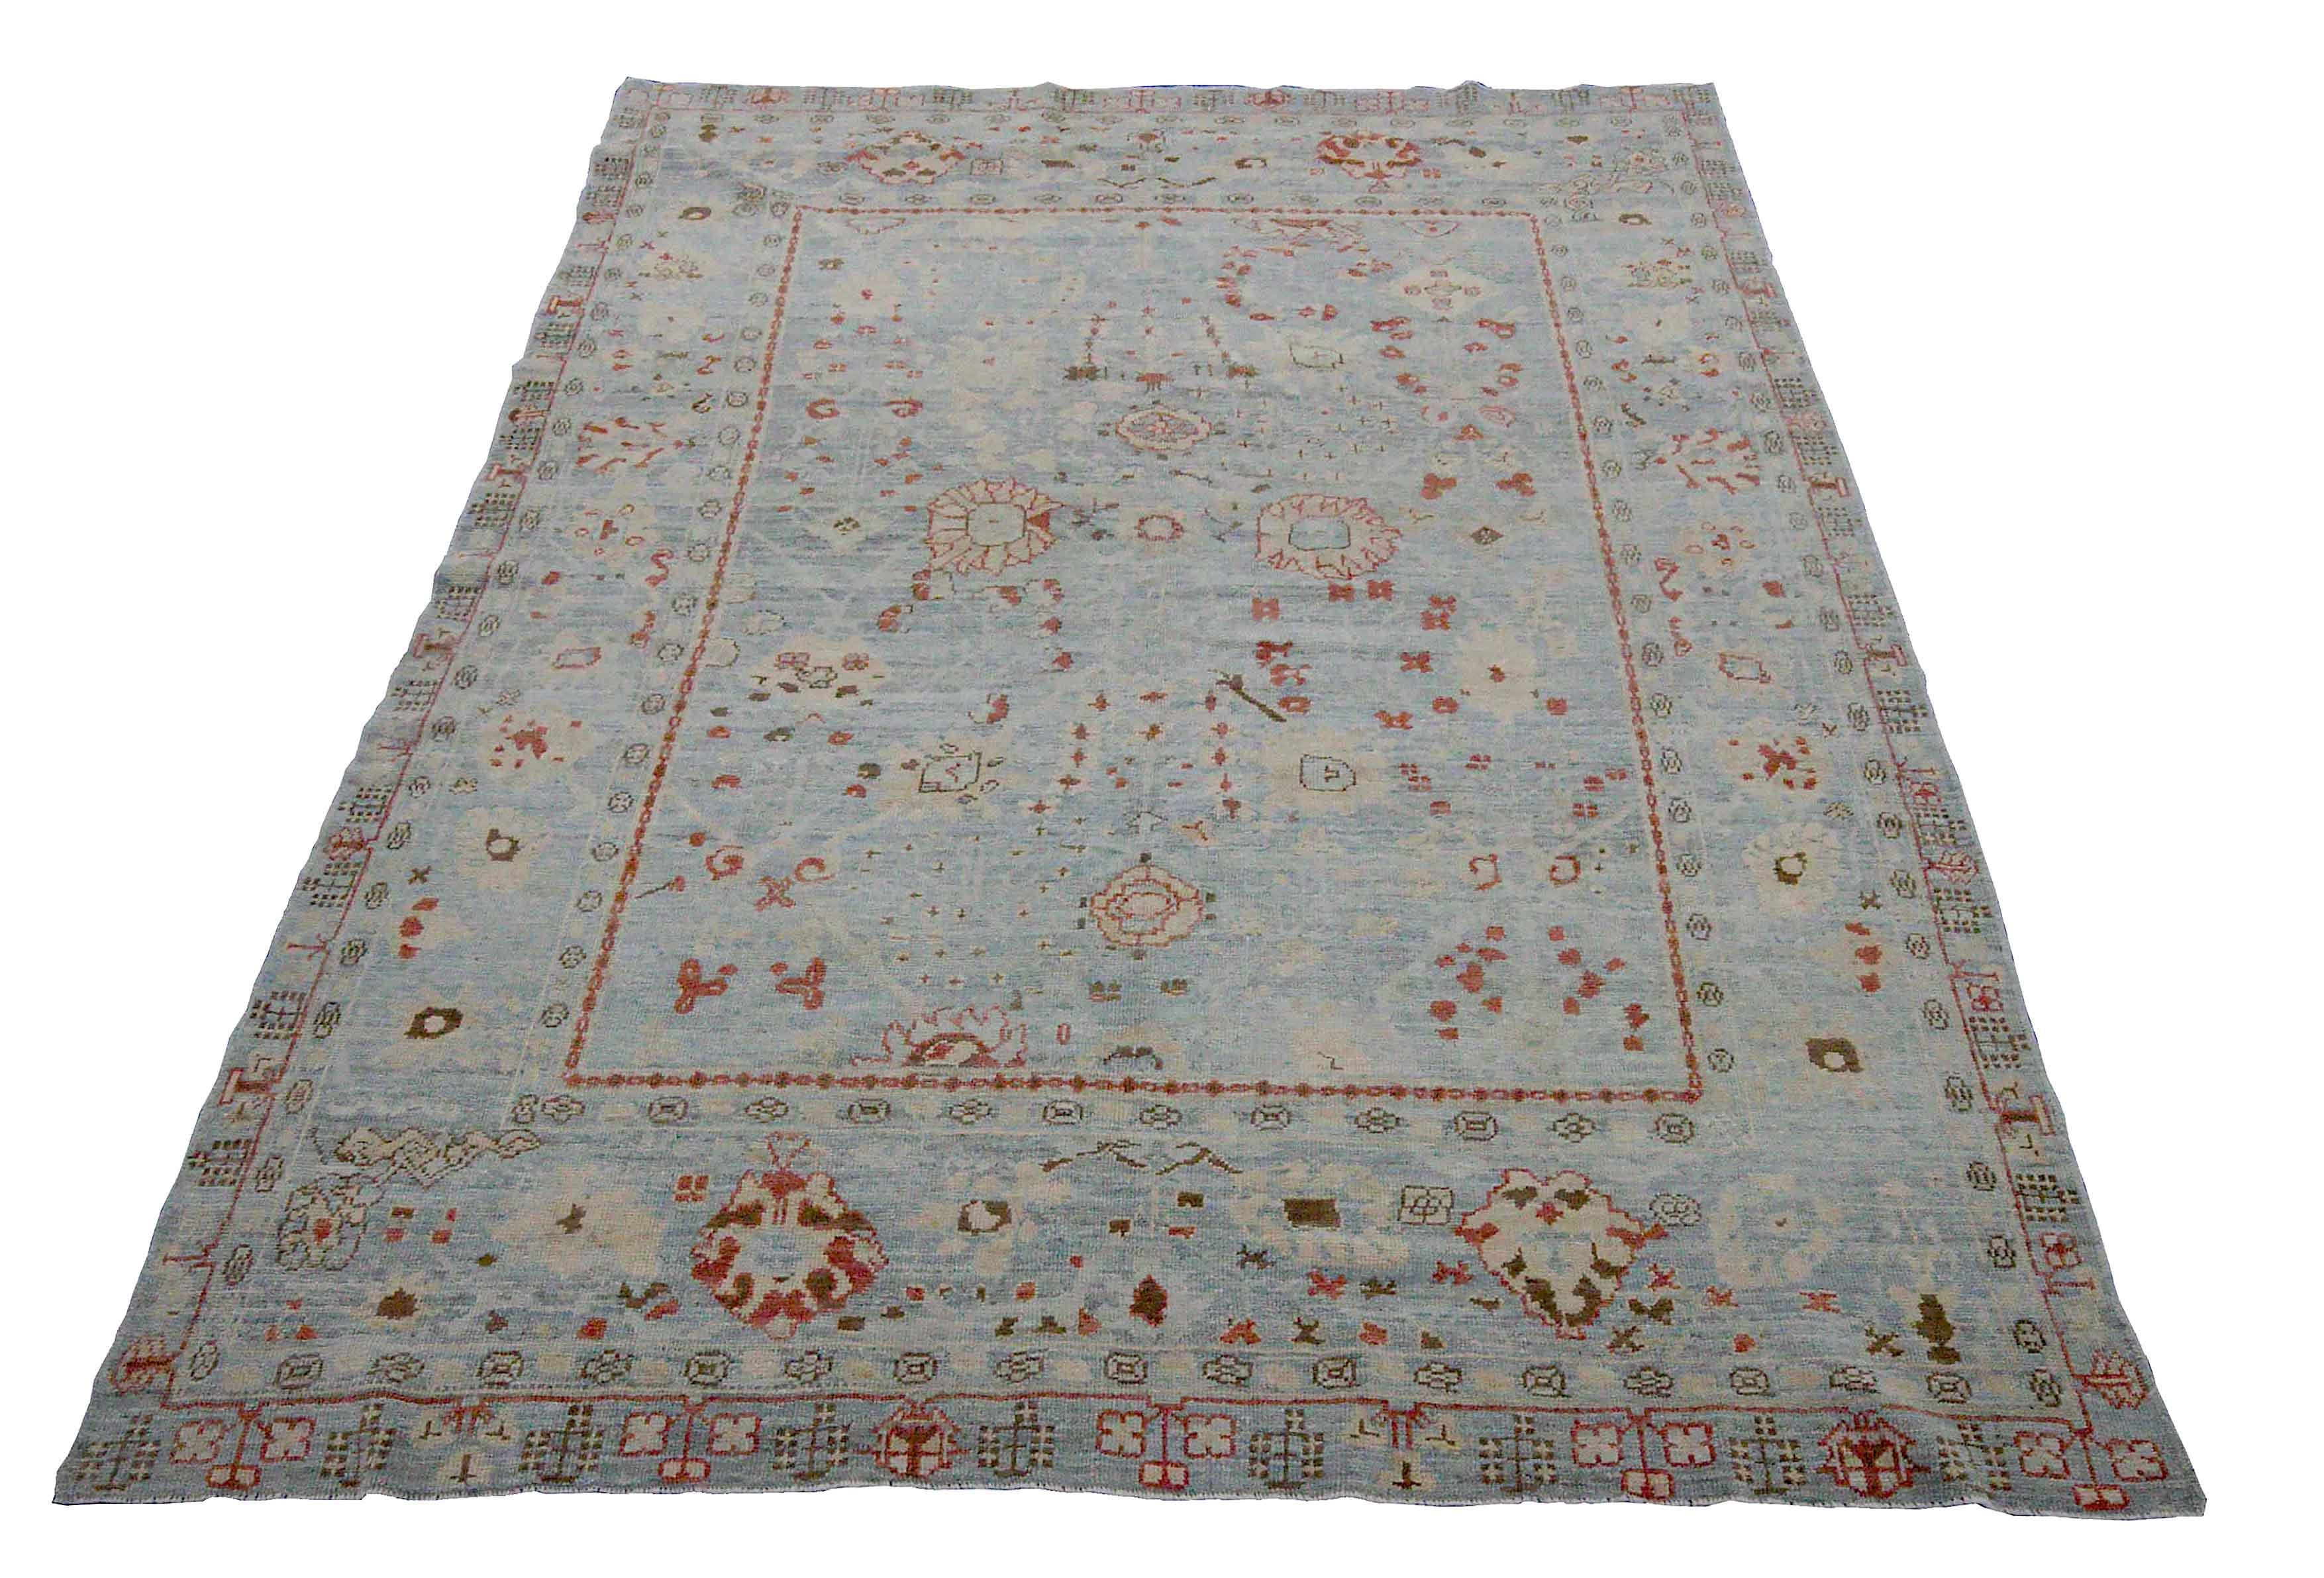 New Turkish rug made of handwoven sheep’s wool of the finest quality. It’s colored with organic vegetable dyes that are certified safe for humans and pets alike. It features floral details in ivory and red over an exquisite blue field. Flower